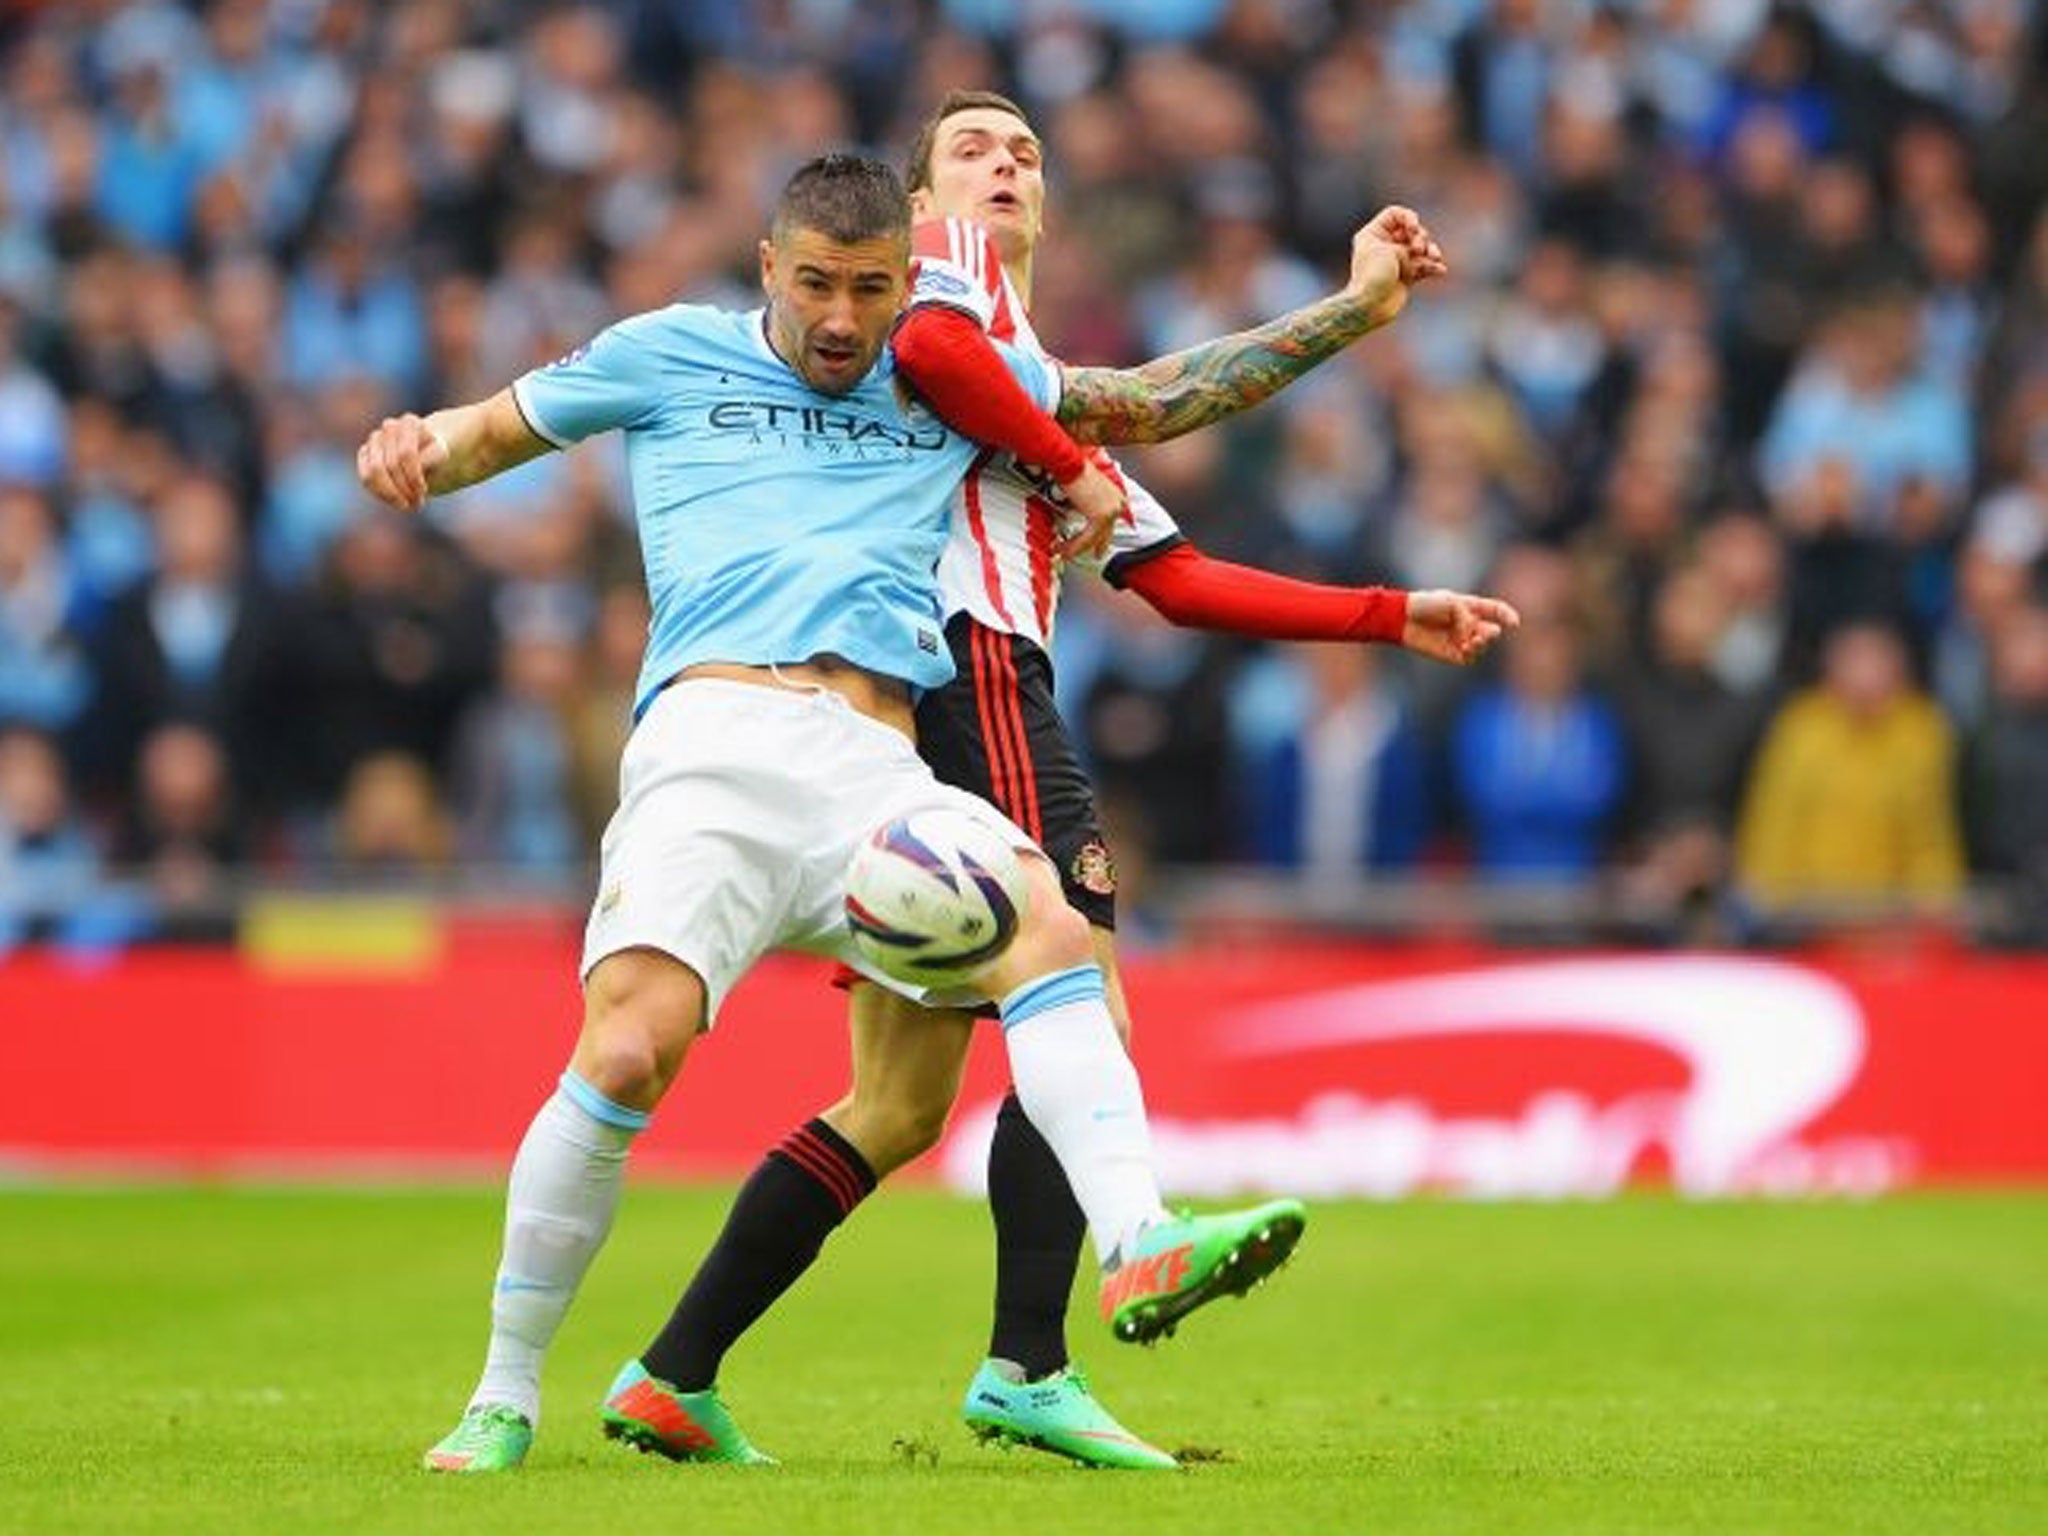 Aleksandar Kolarov of Manchester City is challenged by Adam Johnson of Sunderland during the Capital One Cup Final between Manchester City and Sunderland at Wembley Stadium (Getty)